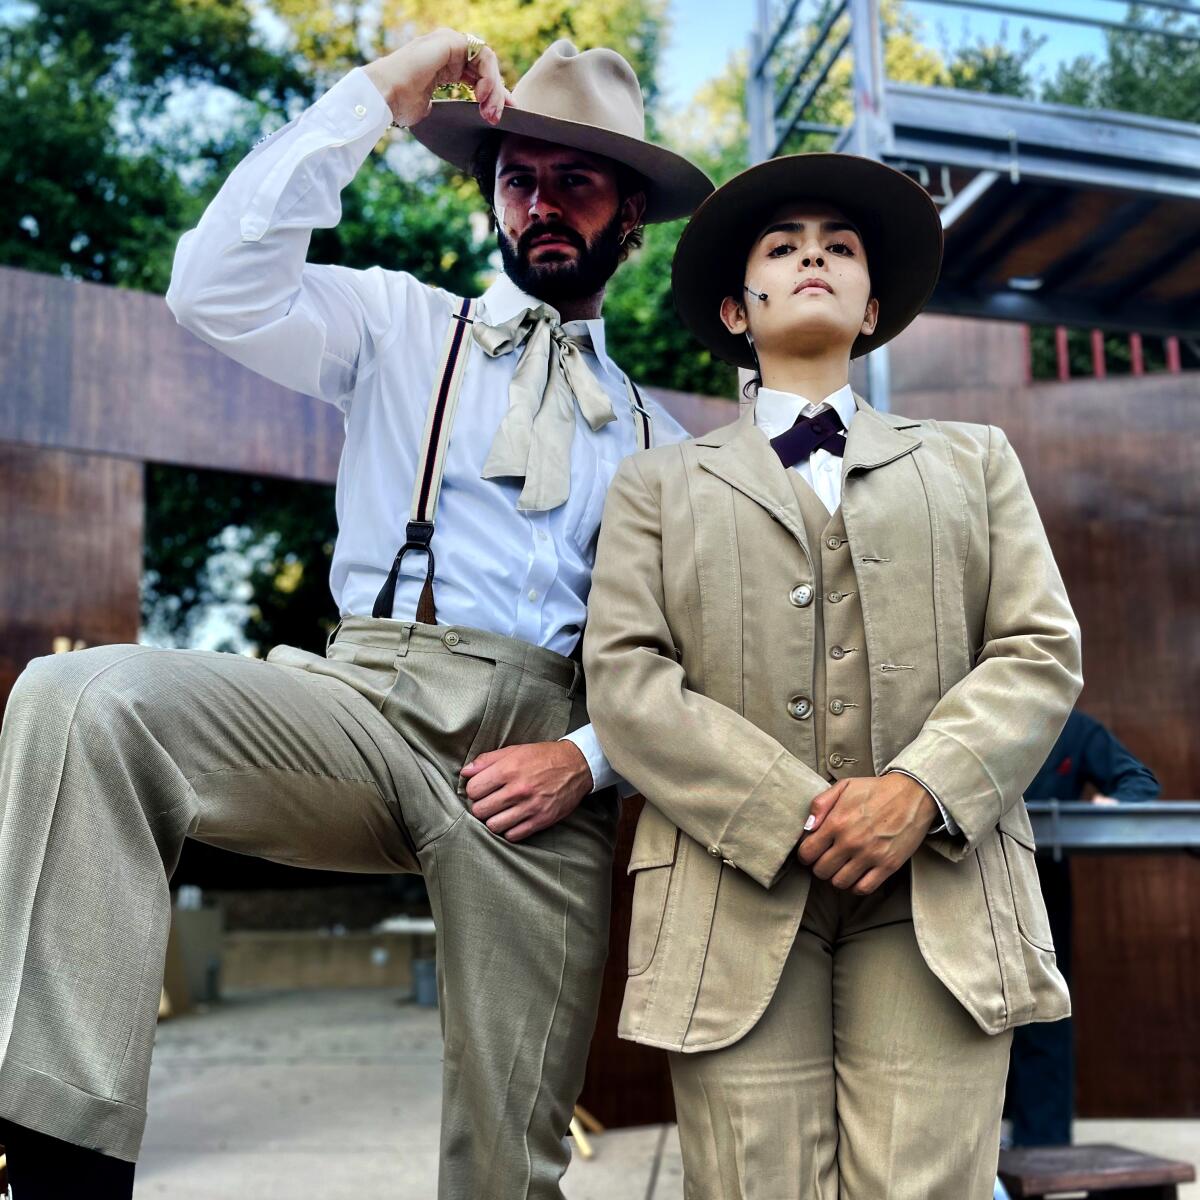 Two people dressed in period suits.